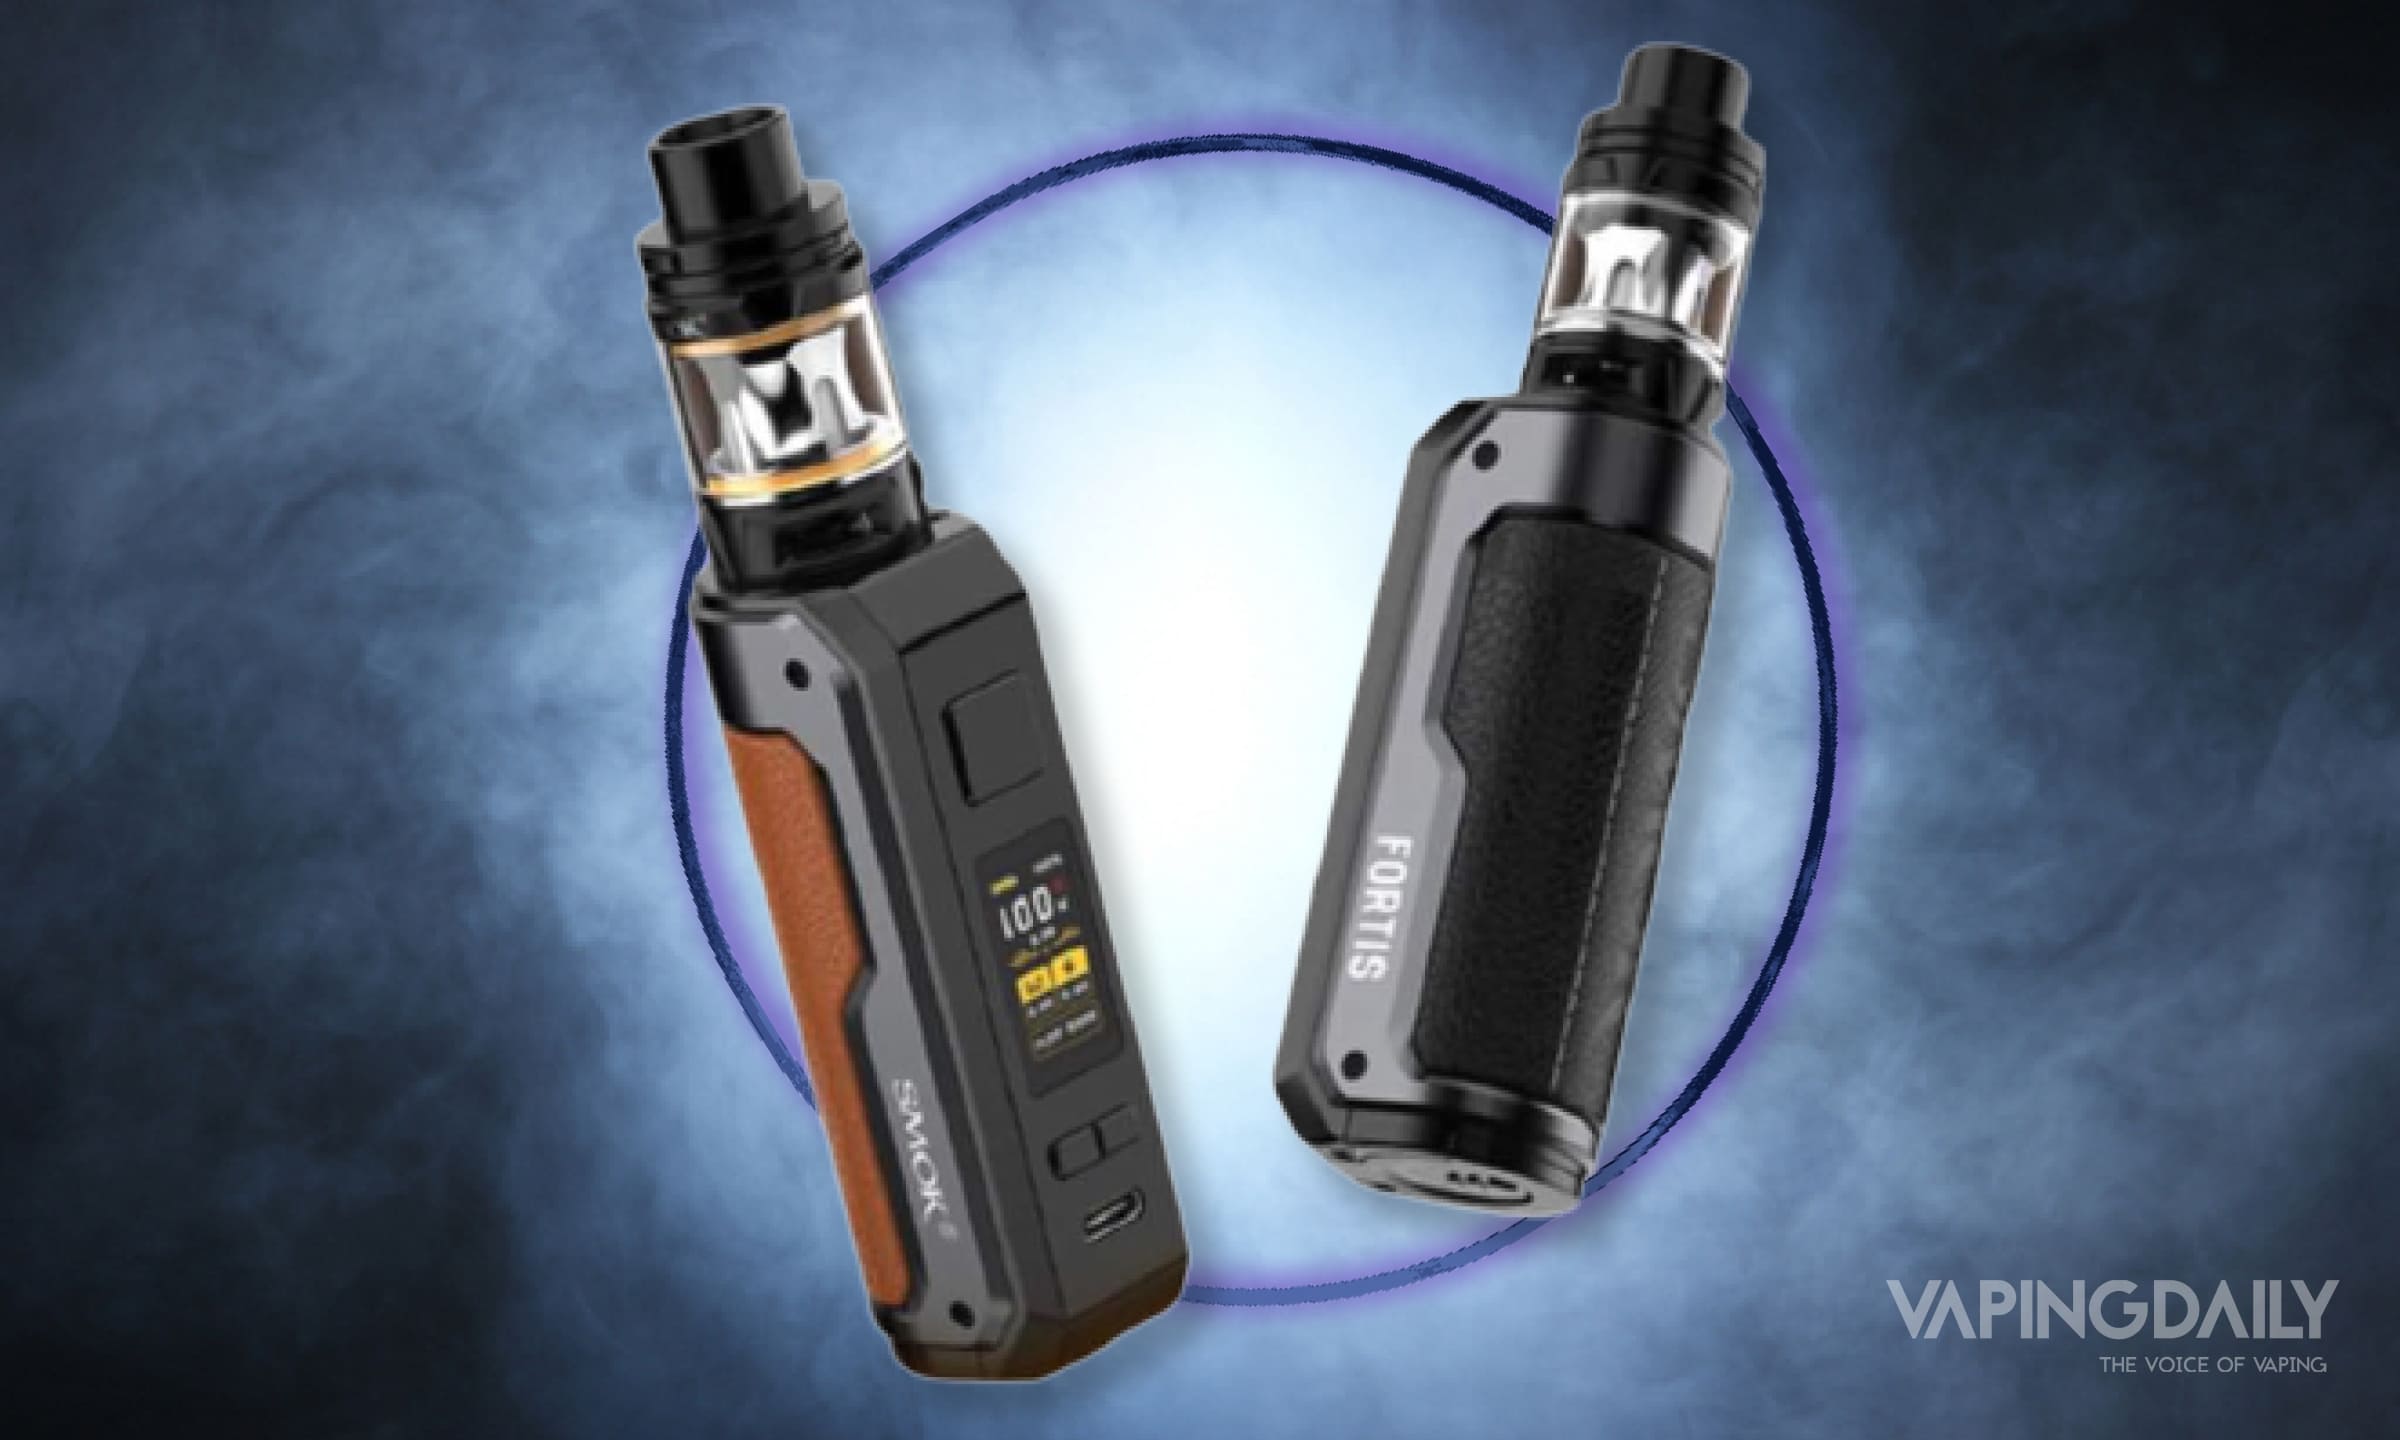 New Smok Fortis 100W Review